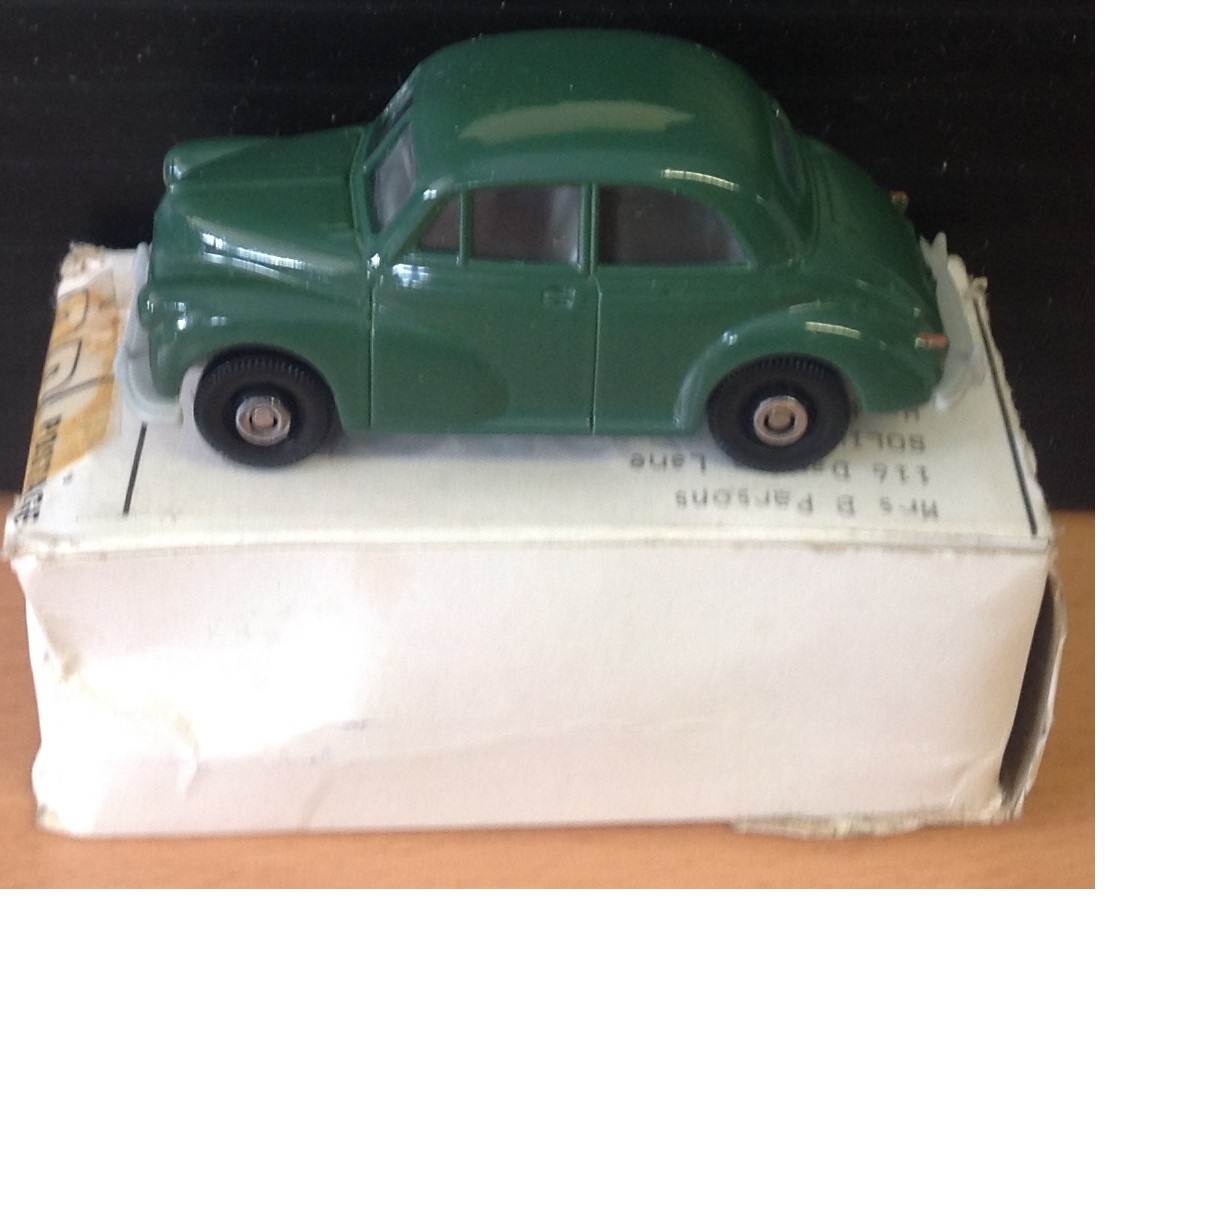 Classic Morris Minor die cast model made by Corgi in original box. Good Condition. All signed pieces